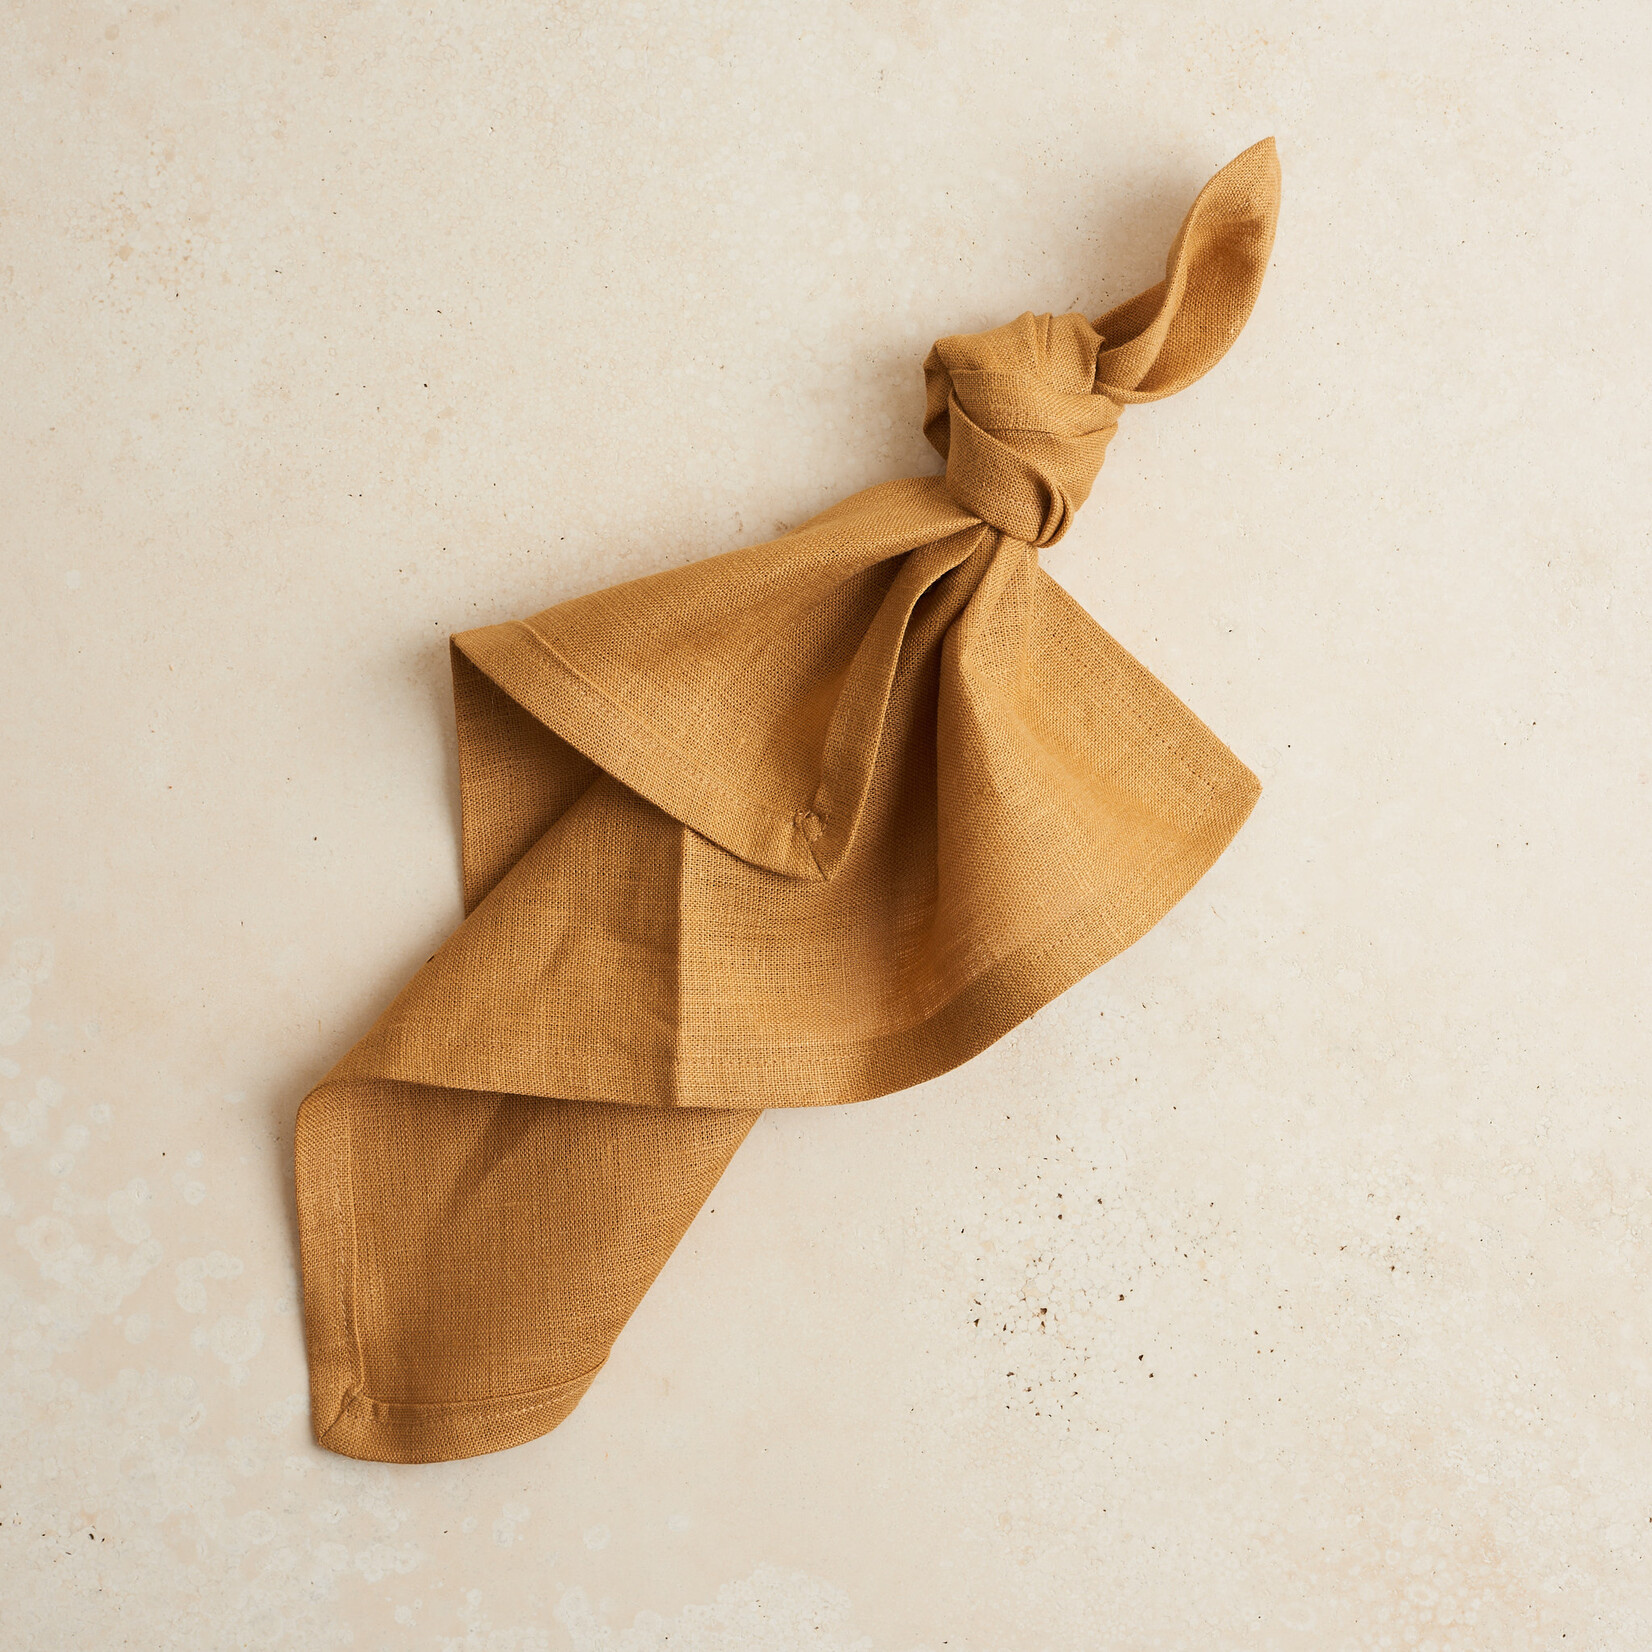 My Mother's Linen Napkins - set of 2 - rye wheat